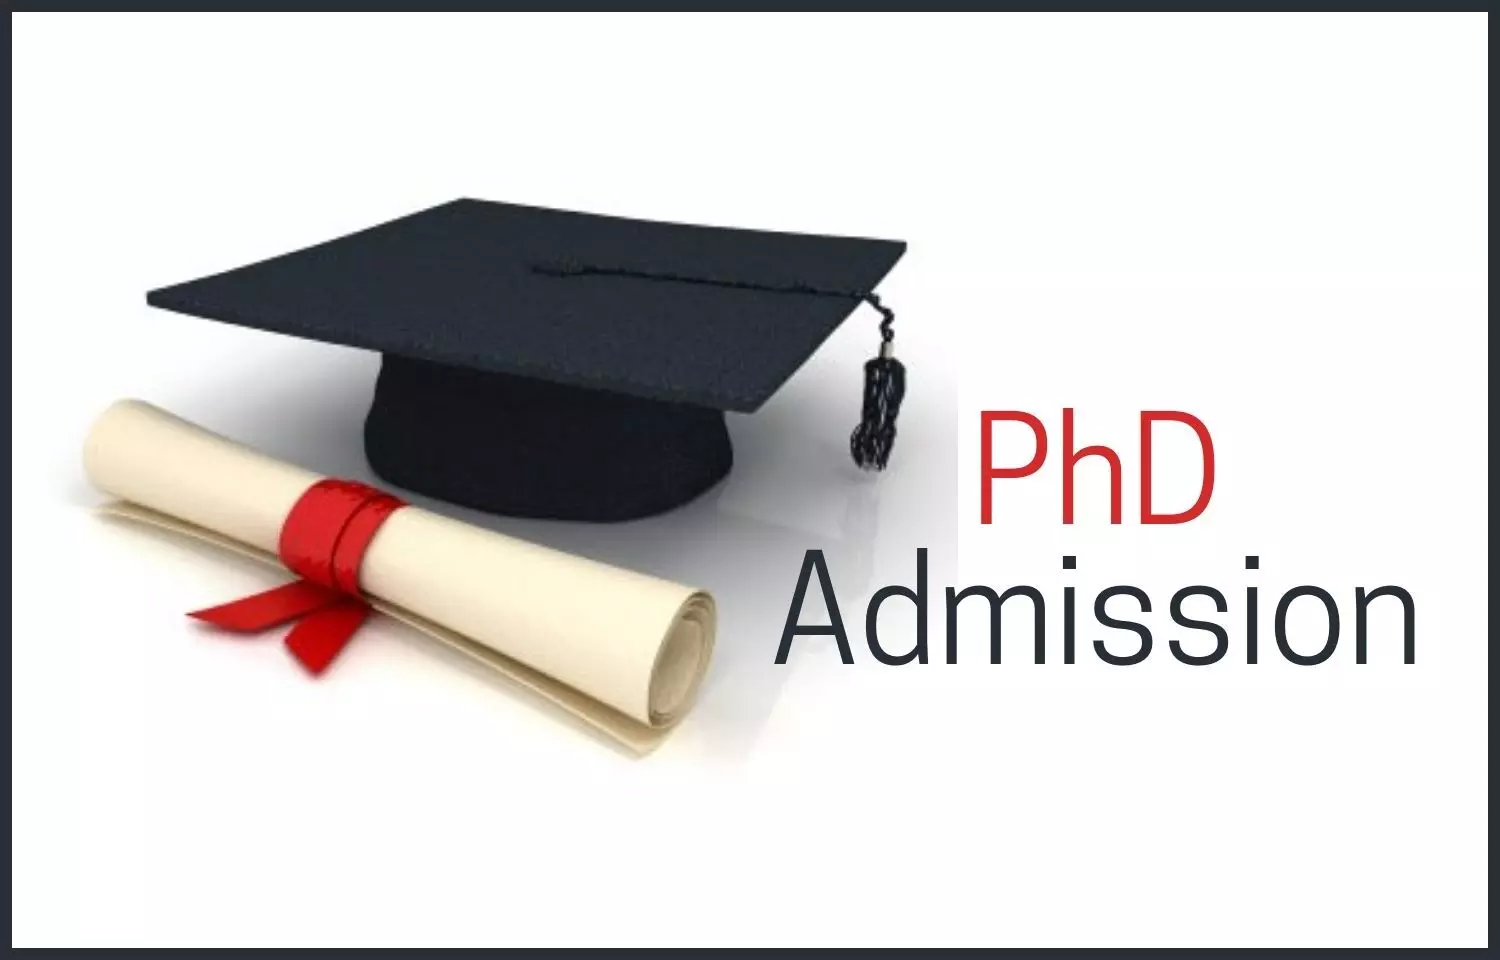 PhD Admissions: MUHS issues notice for candidates, Check out seat matrix